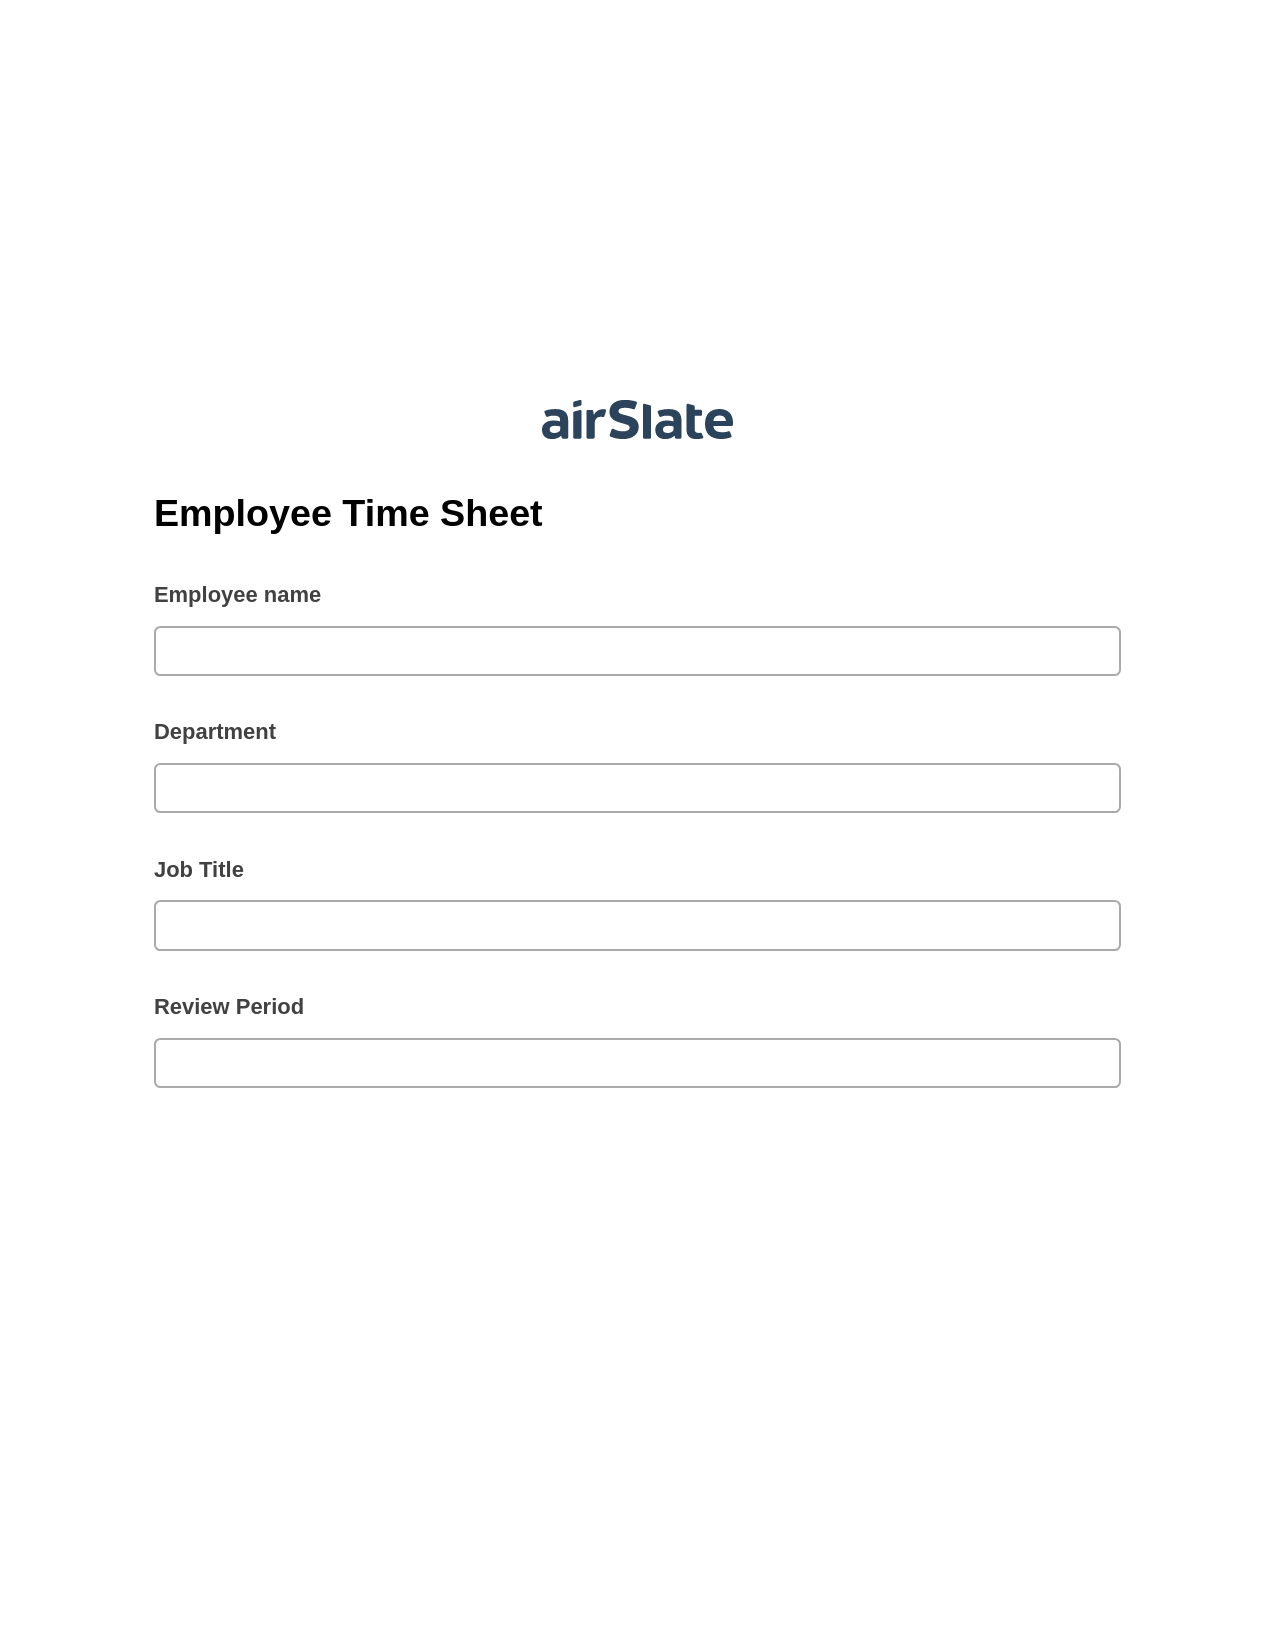 Employee Time Sheet Pre-fill Dropdowns from MySQL Bot, Create Salesforce Records Bot, Archive to SharePoint Folder Bot